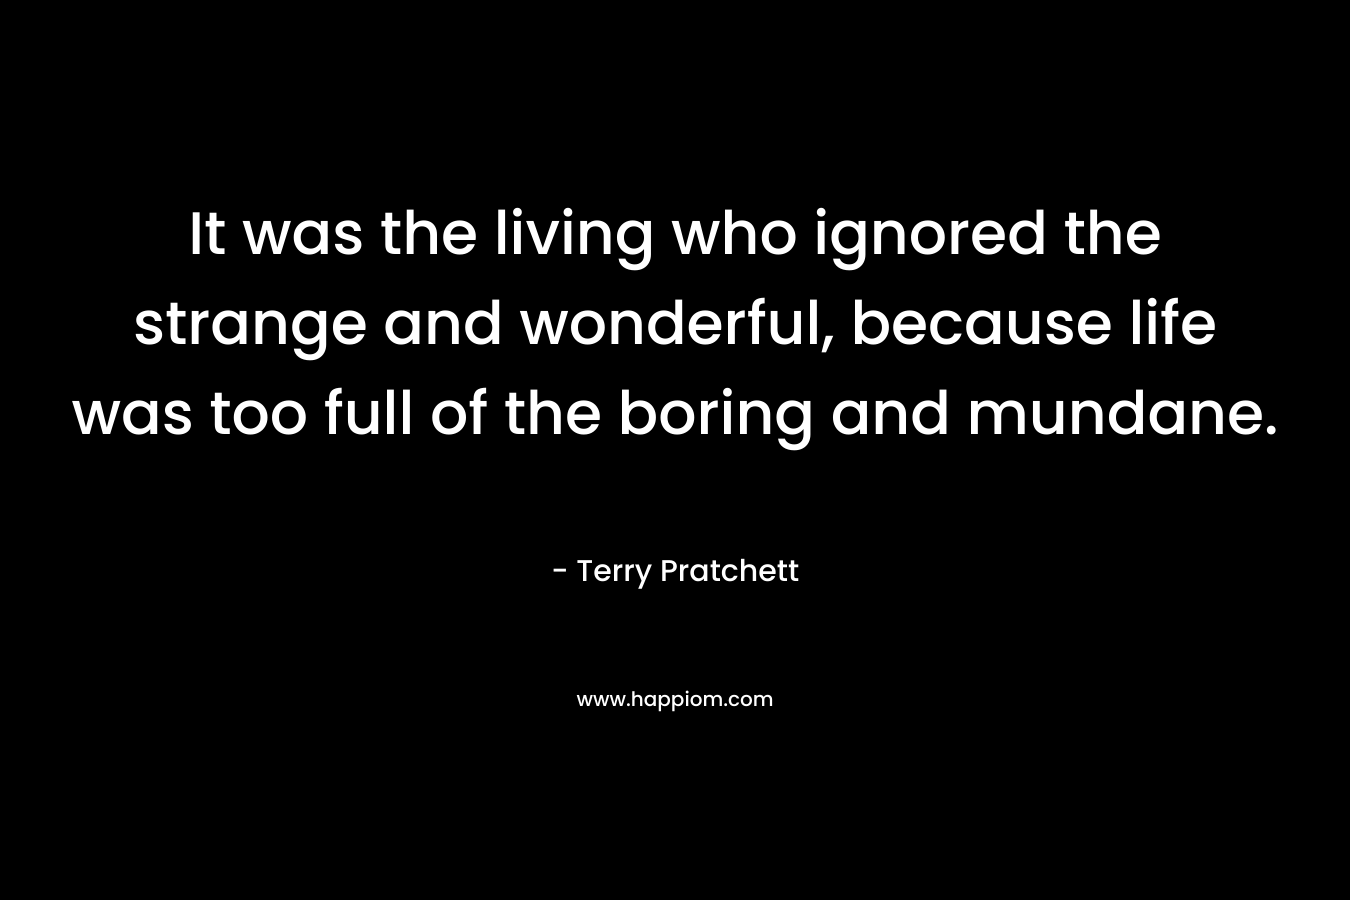 It was the living who ignored the strange and wonderful, because life was too full of the boring and mundane. – Terry Pratchett